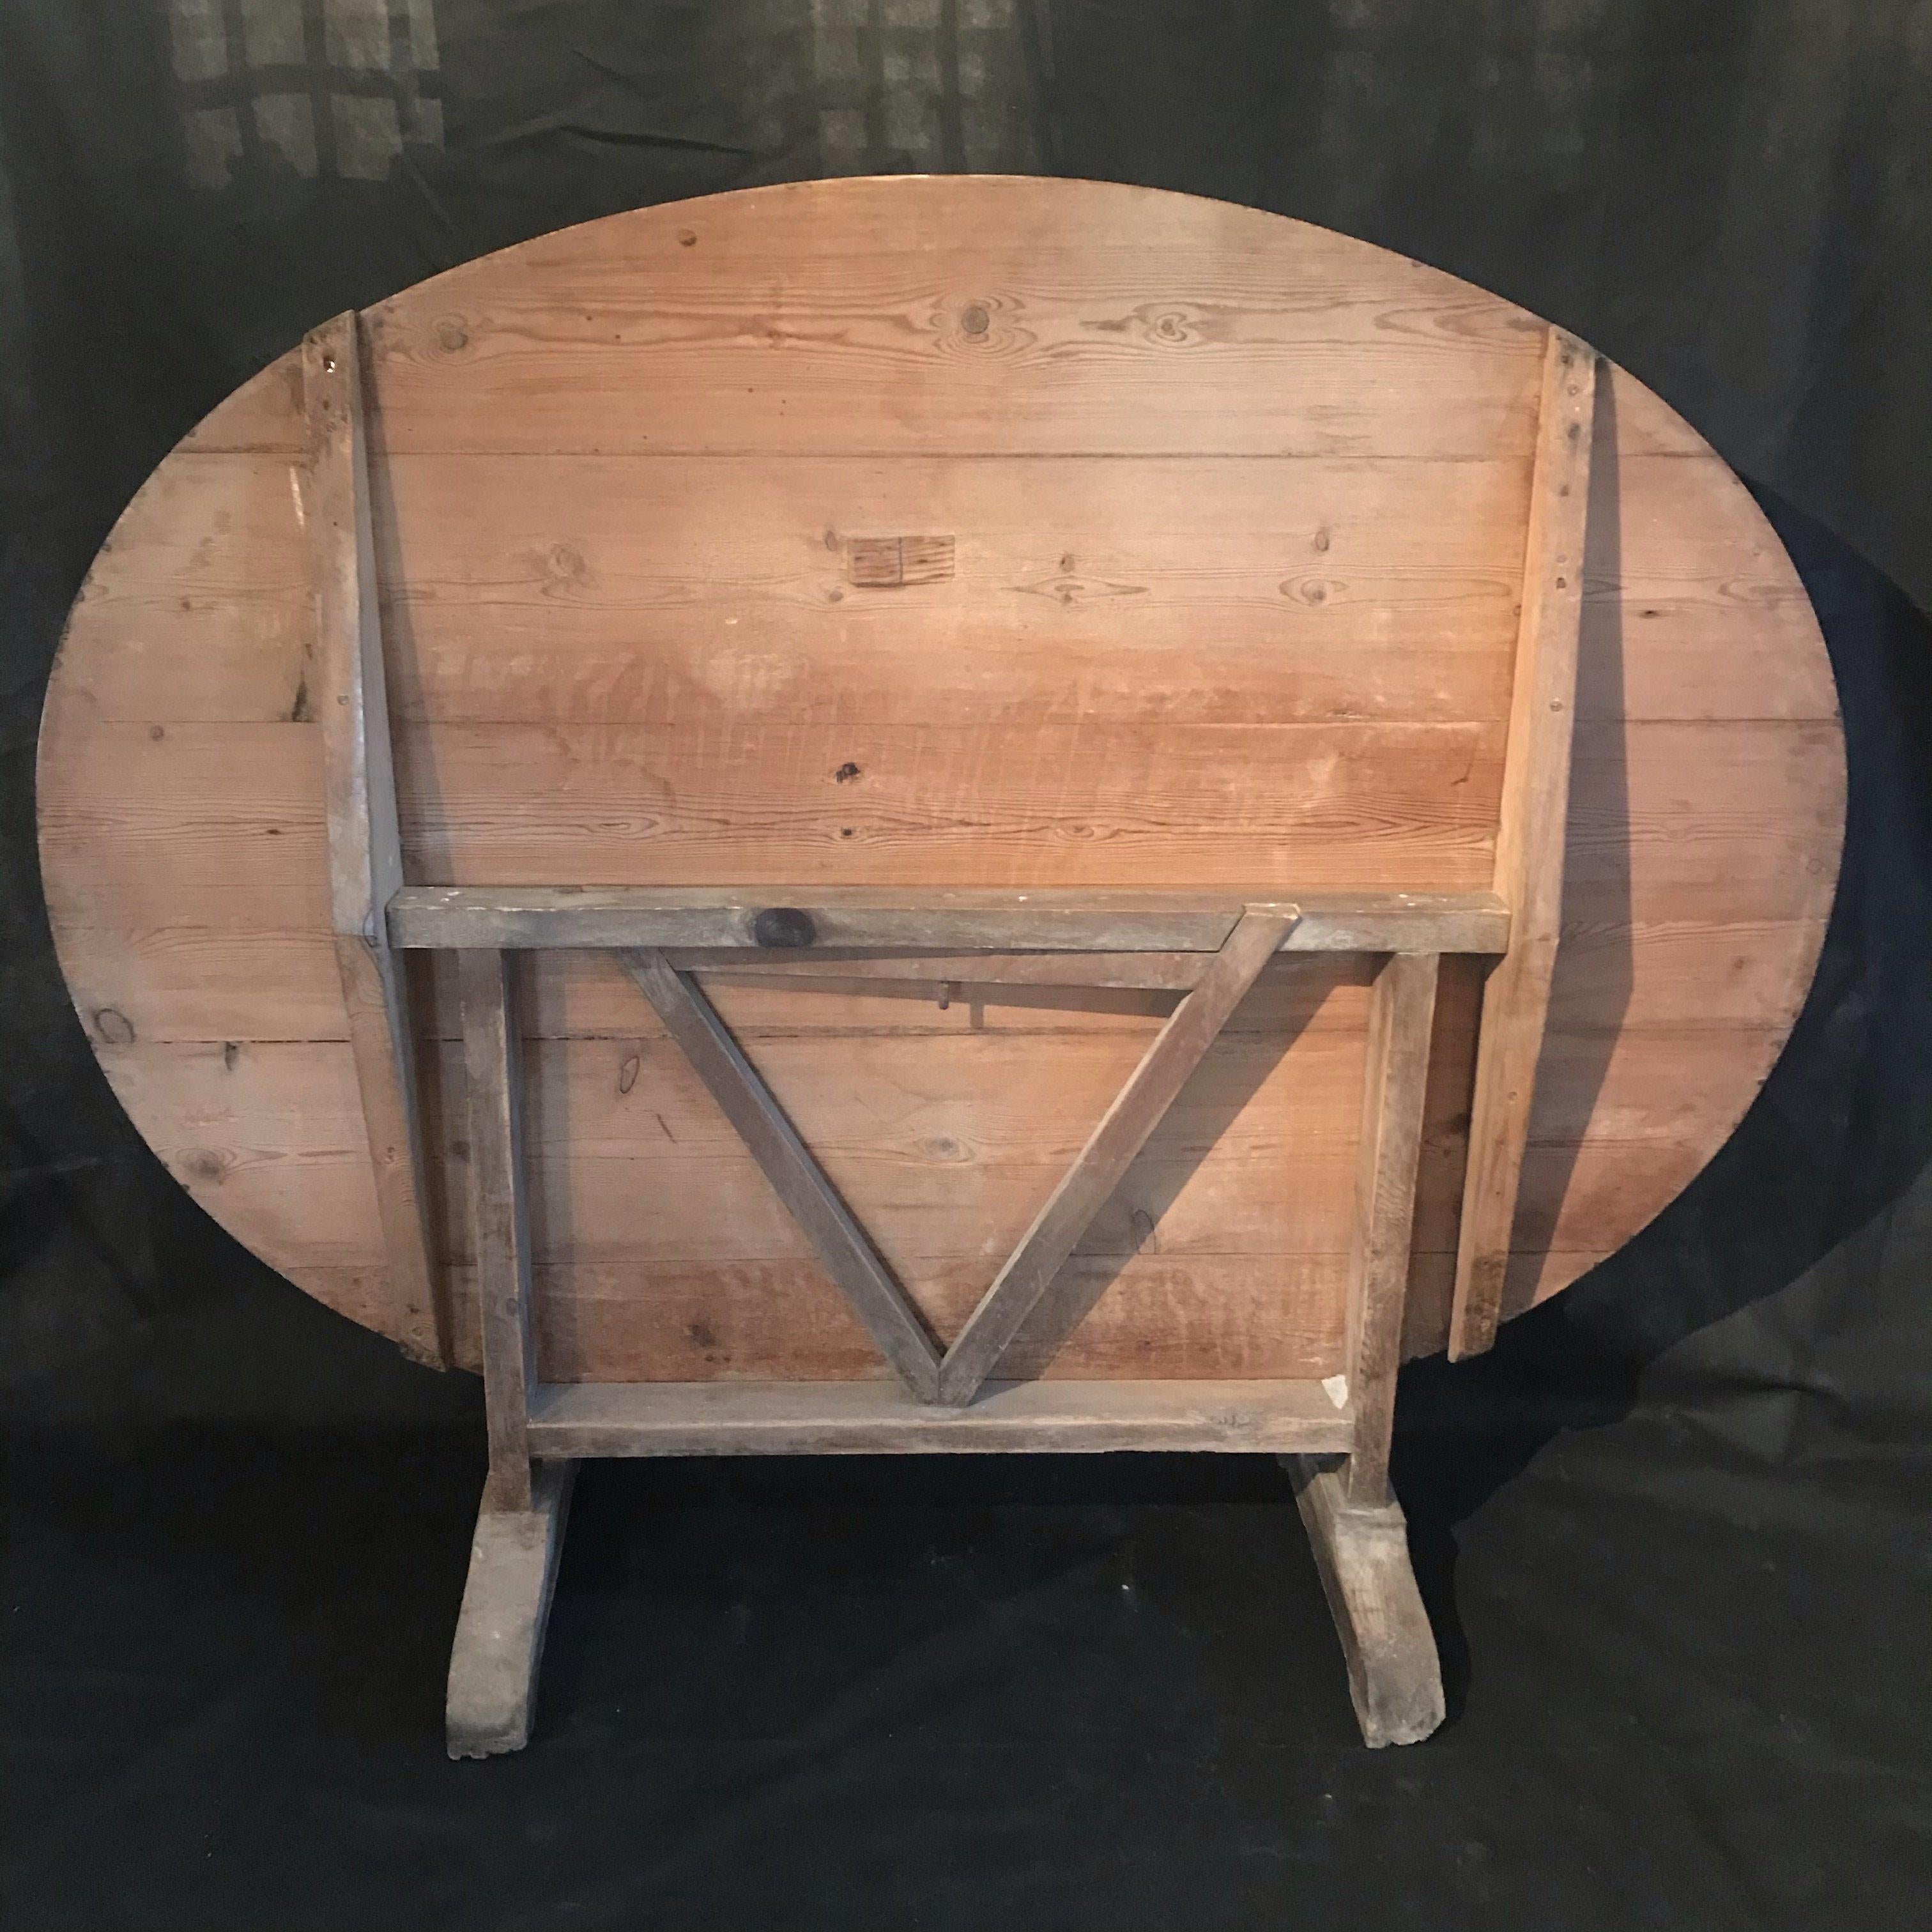 Large French oval wine tasting table, also known as a vendage or vigeron
table, which was once used in the vineyards of France for tasting wine or
enjoying a meal. This table would be suitable for use in a breakfast area or
wine cellar. Featuring